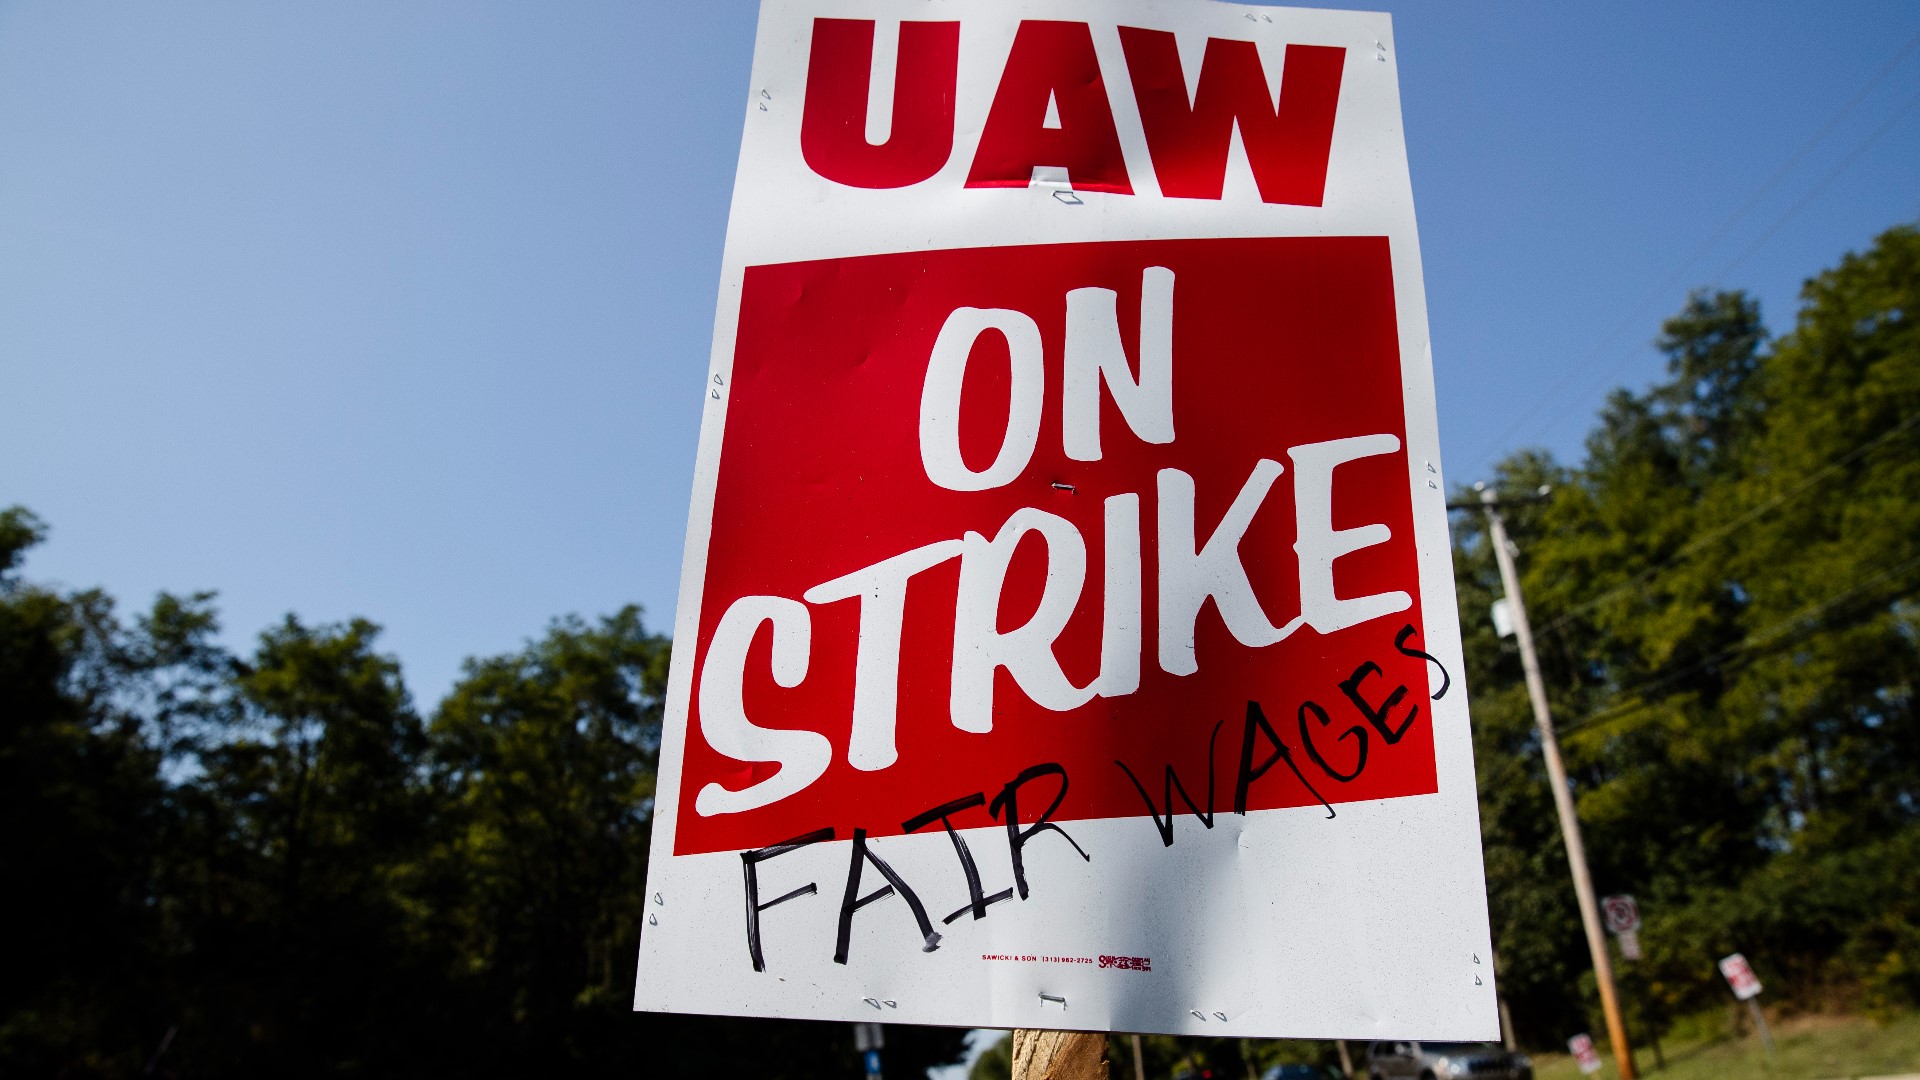 Local economists say a prolonged strike could cost West Michigan's economy as much as $150 million a week.